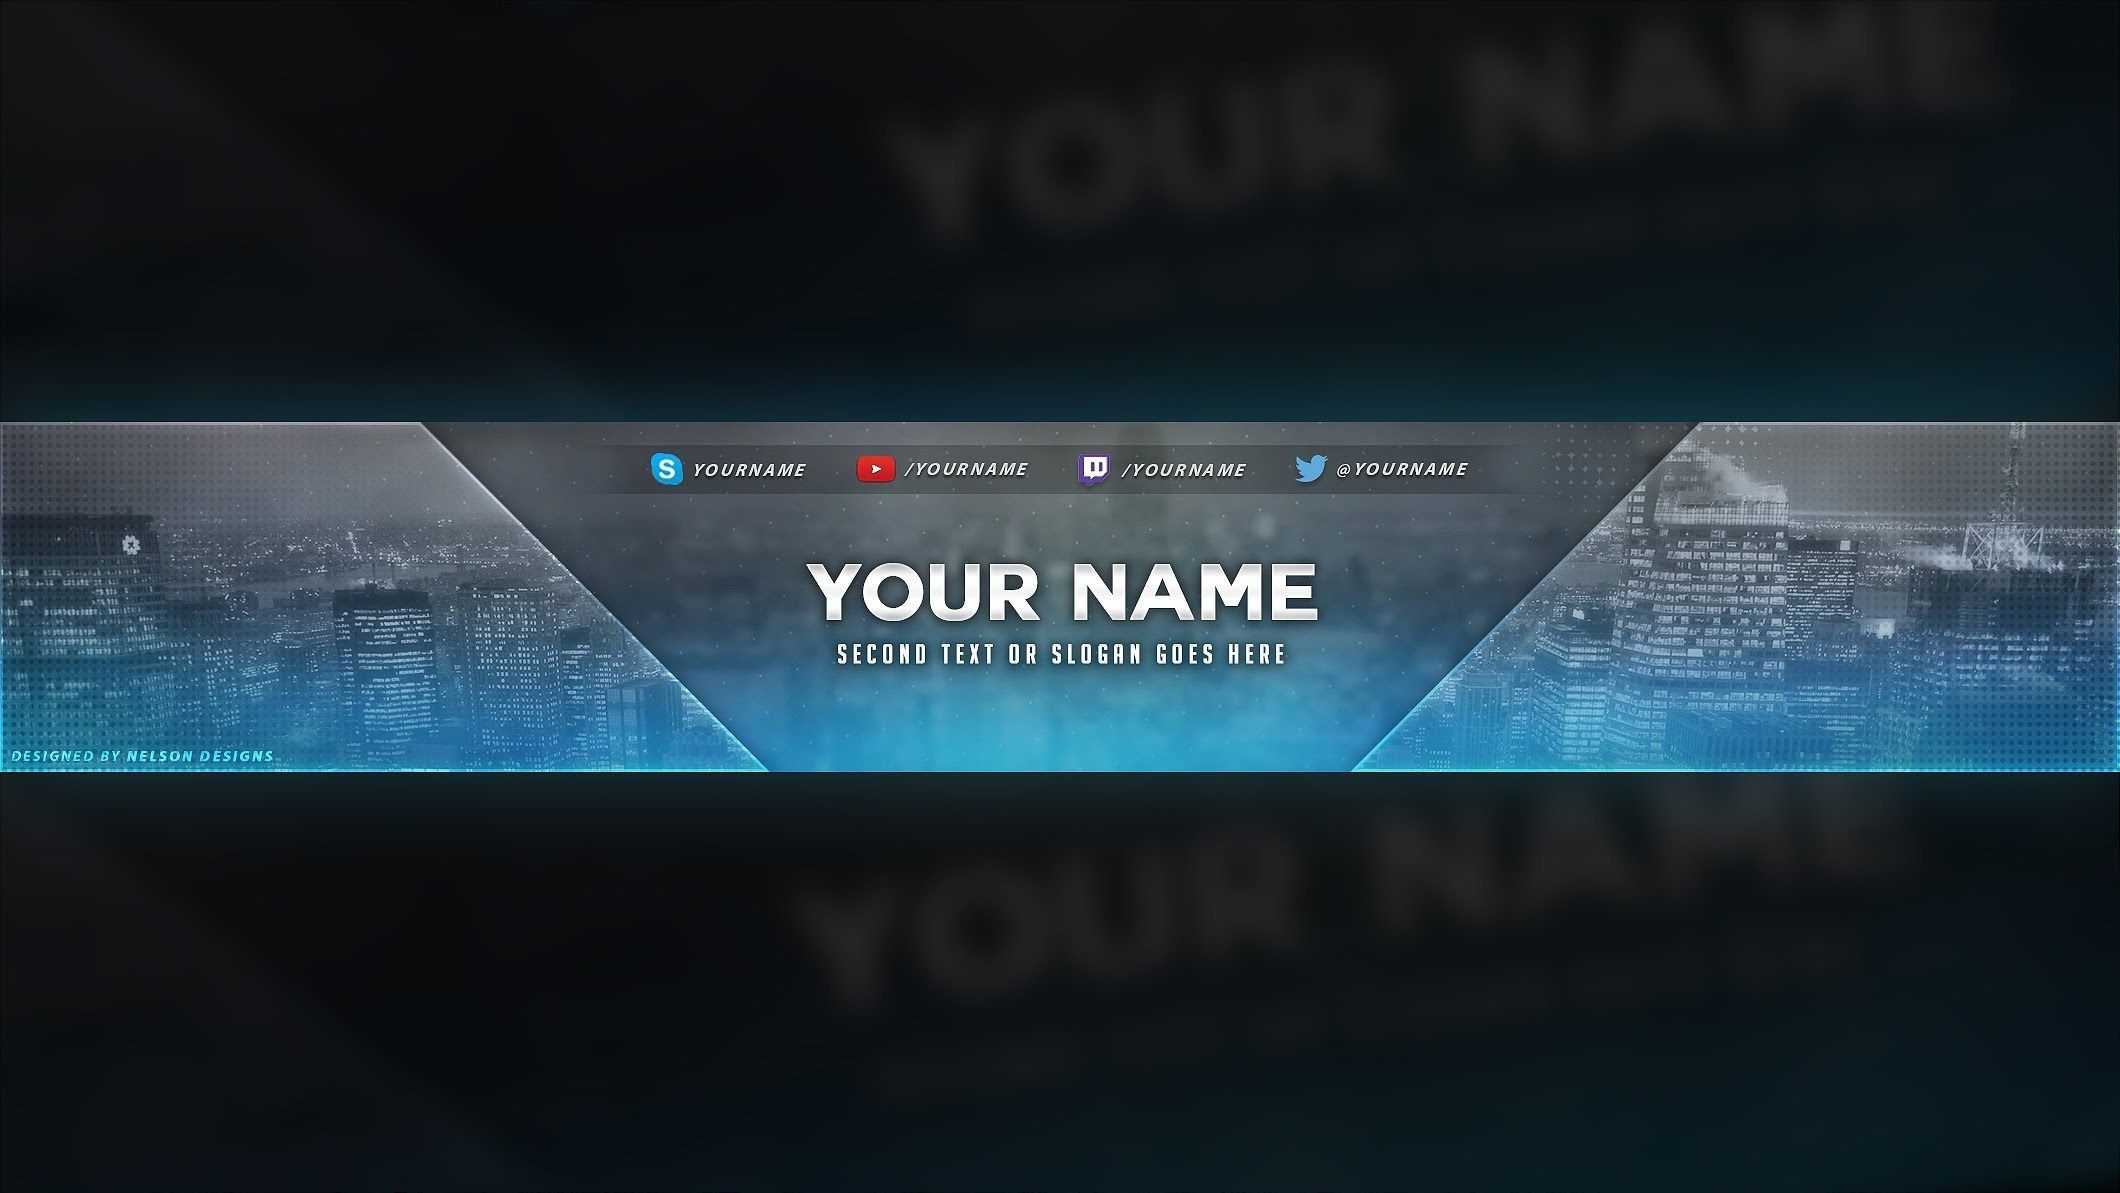 4 Free Youtube Banner Psd Template Designs – Social Media Within Yt Banner Template